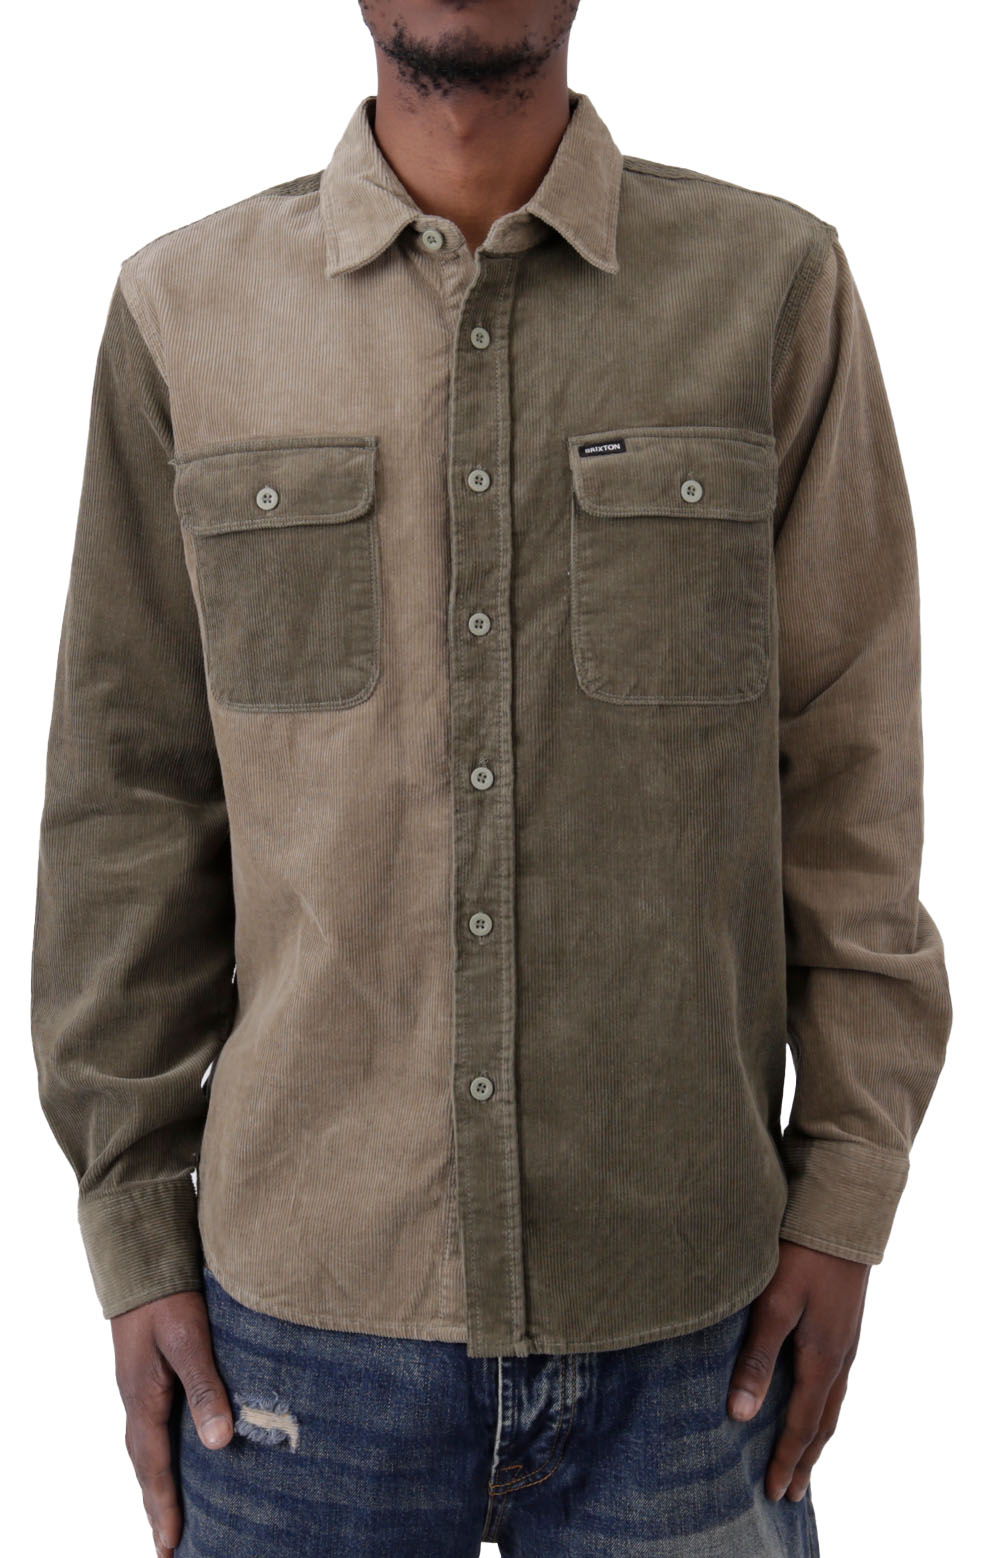 Bowery Corduroy  L/S Flannel - Military Olive/Mermaid